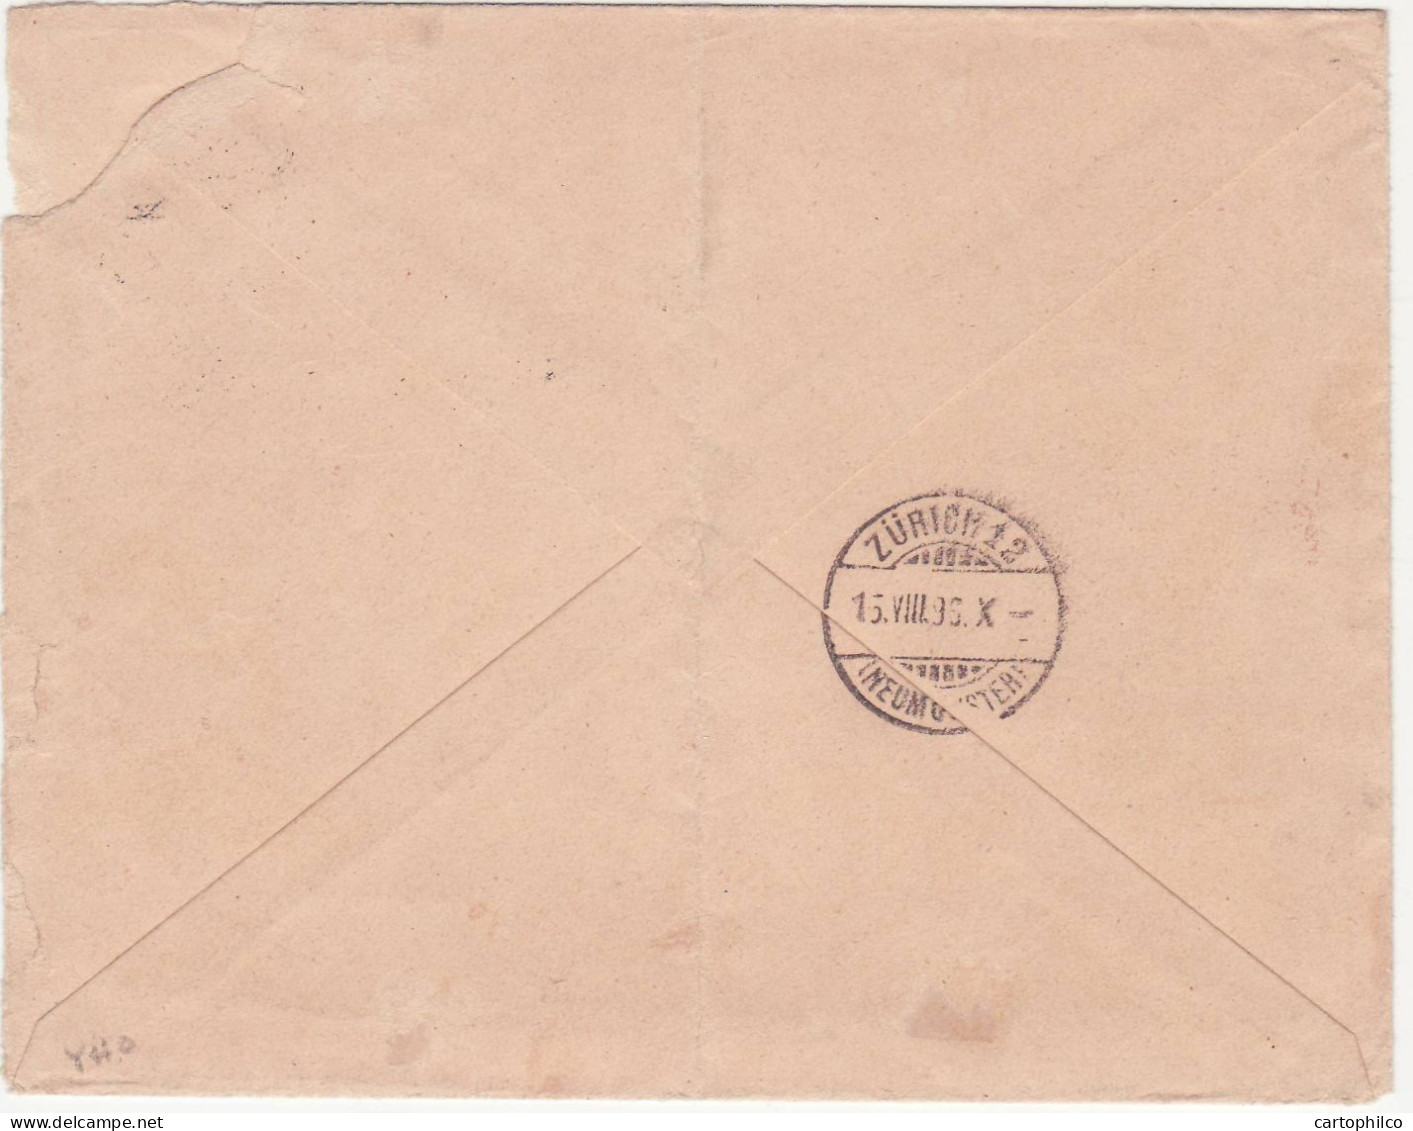 Gambia Registered Cover 2 1/2d Bathurst 1896 For Zurich Switzerland - Gambia (...-1964)